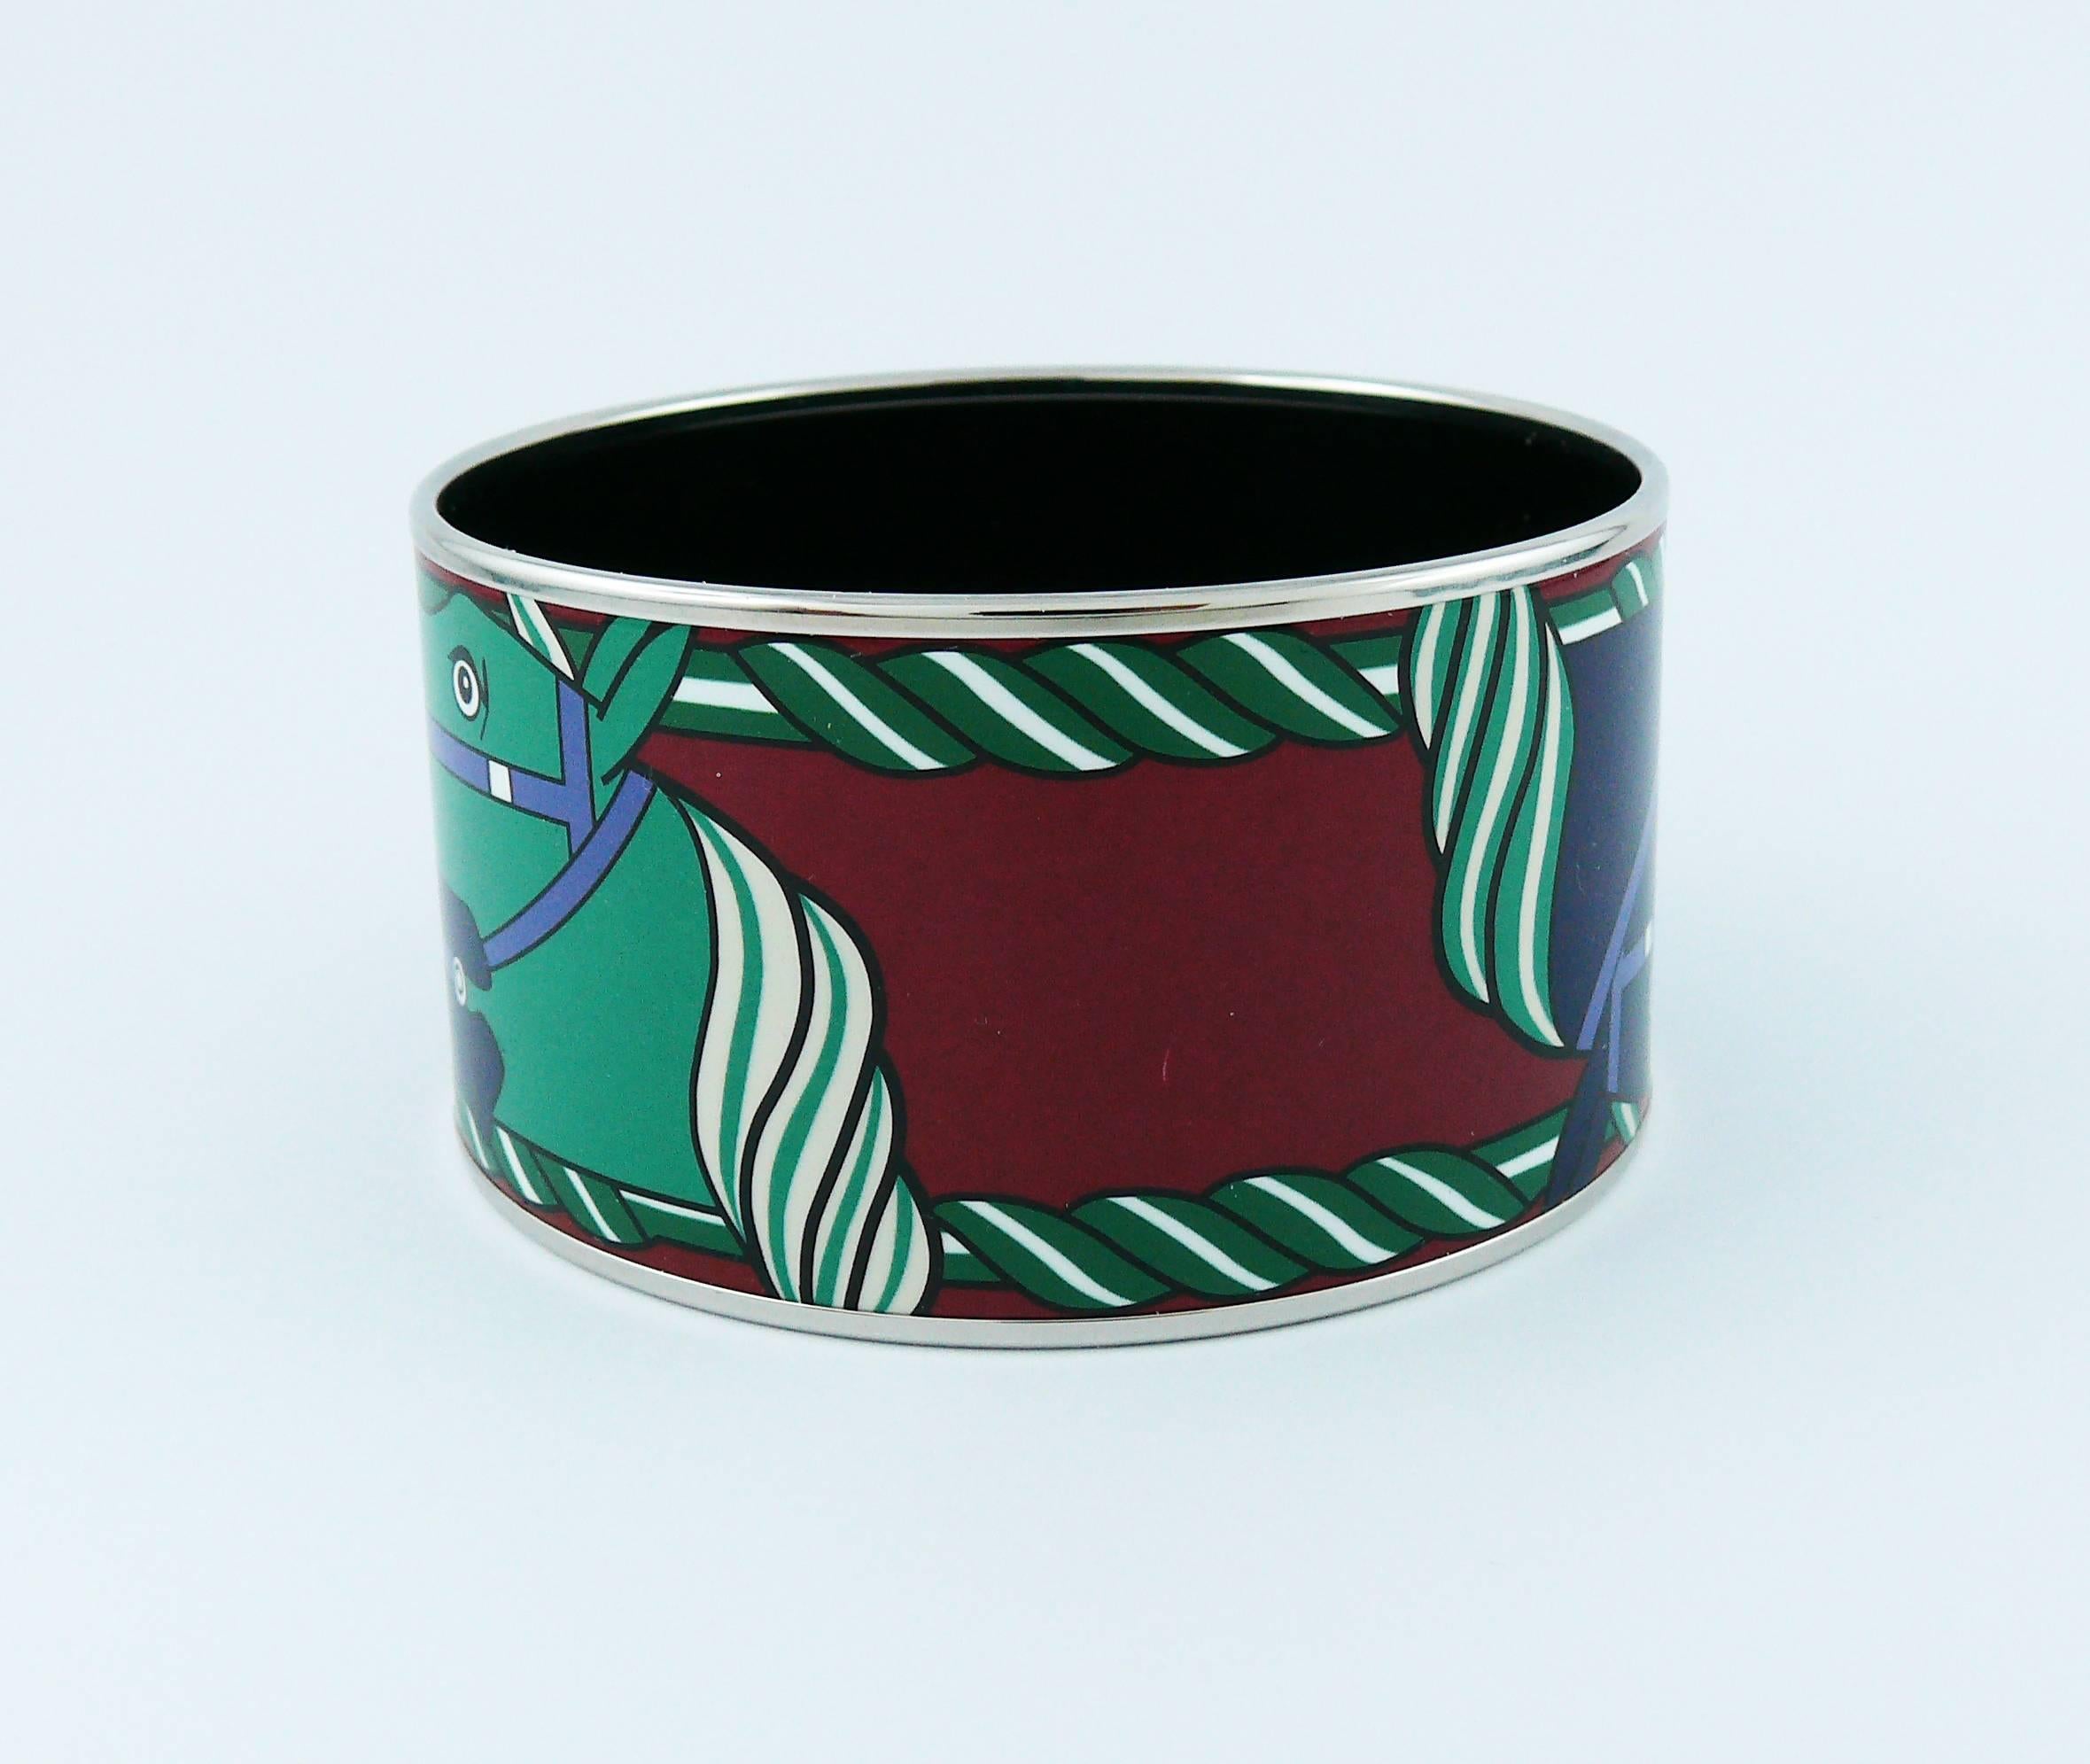 HERMES extra wide printed enamel bracelet featuring a stylized equestrian design in blue, green and white on a burgundy red background.

Palladium plated rims.

Marked HERMES Paris.
Made in France + N.

"S" mark for private sale -